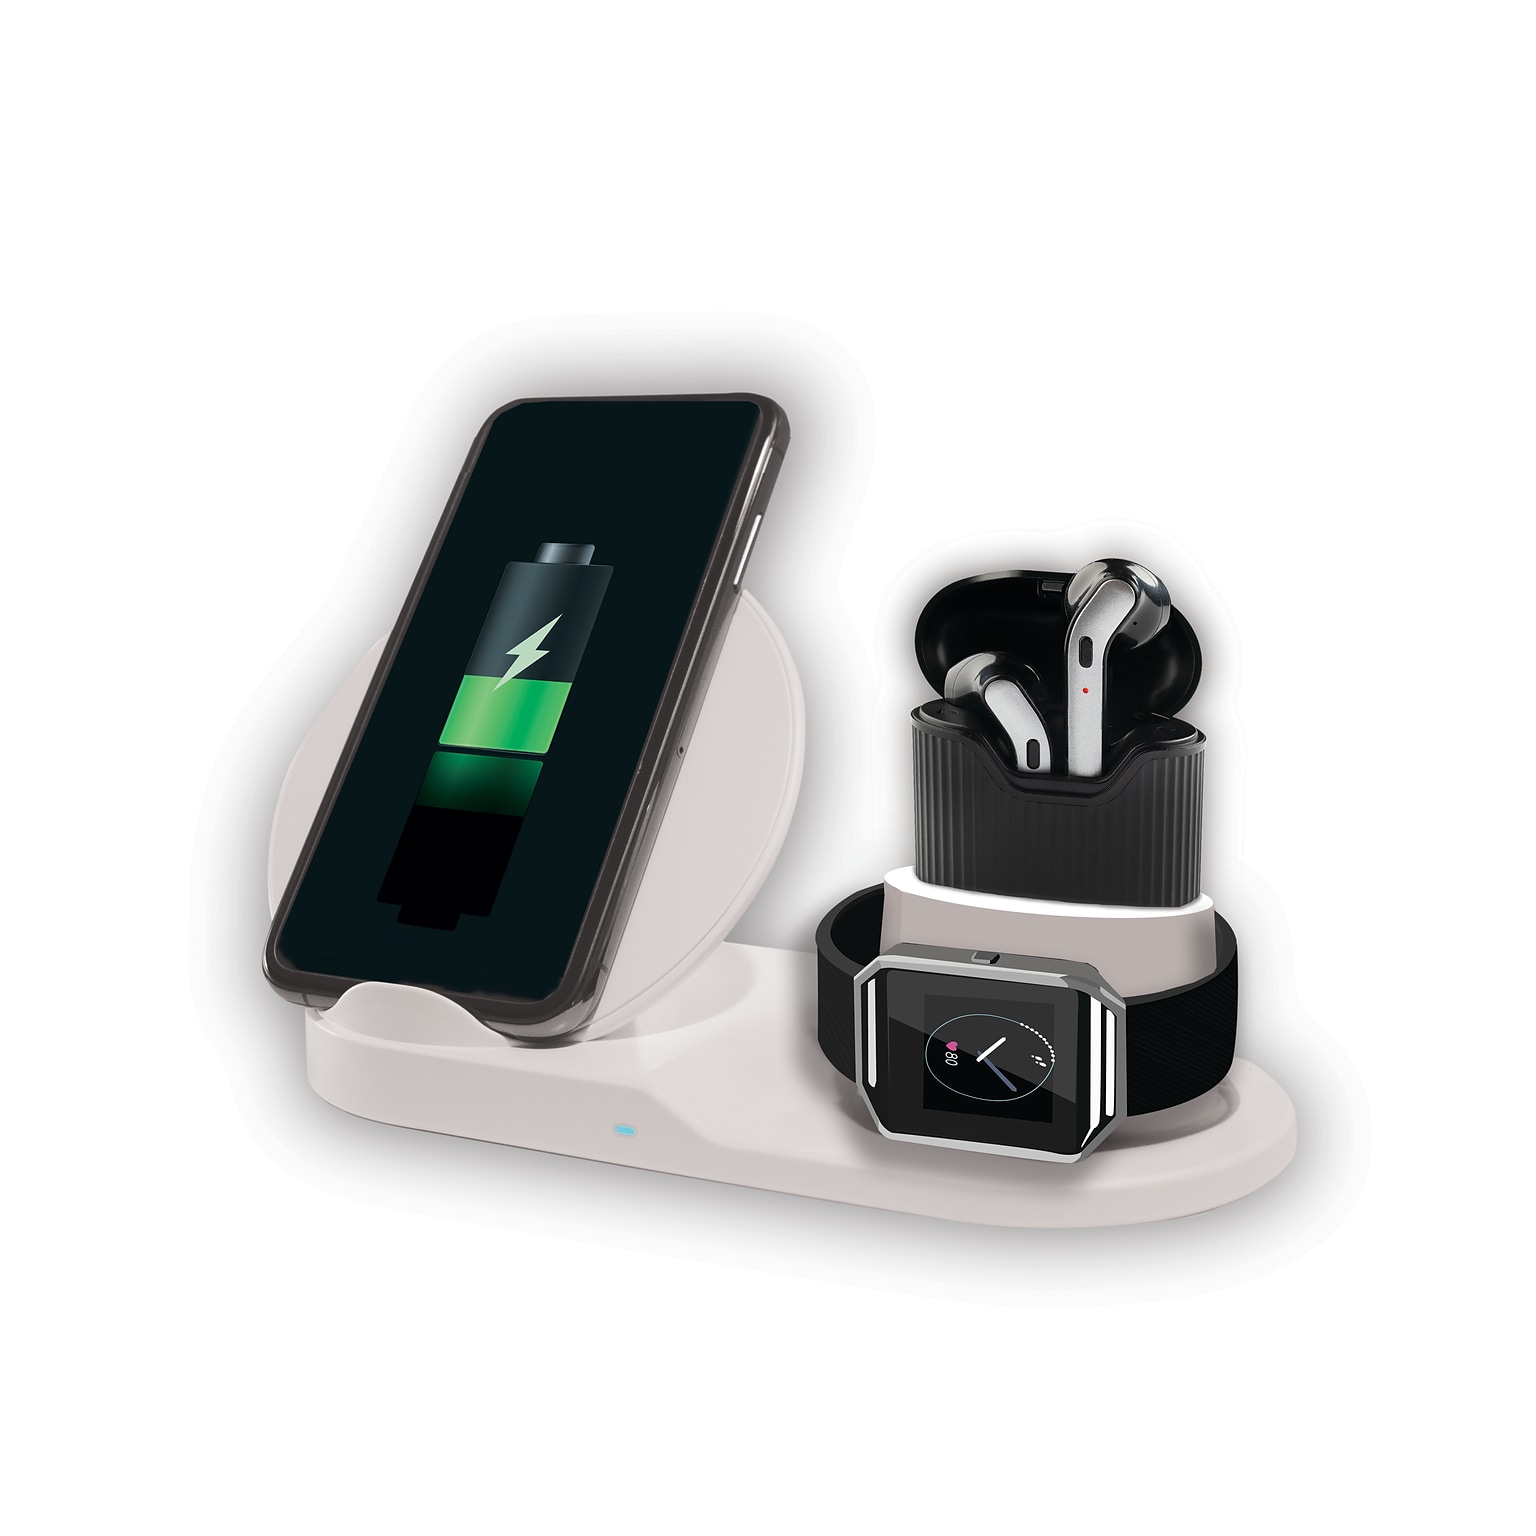 ITEK 3-in-1 Wireless Charging Stand for Apple Watch, Airpods, IPhone and Android Phones, Black (WSC-6/1772)